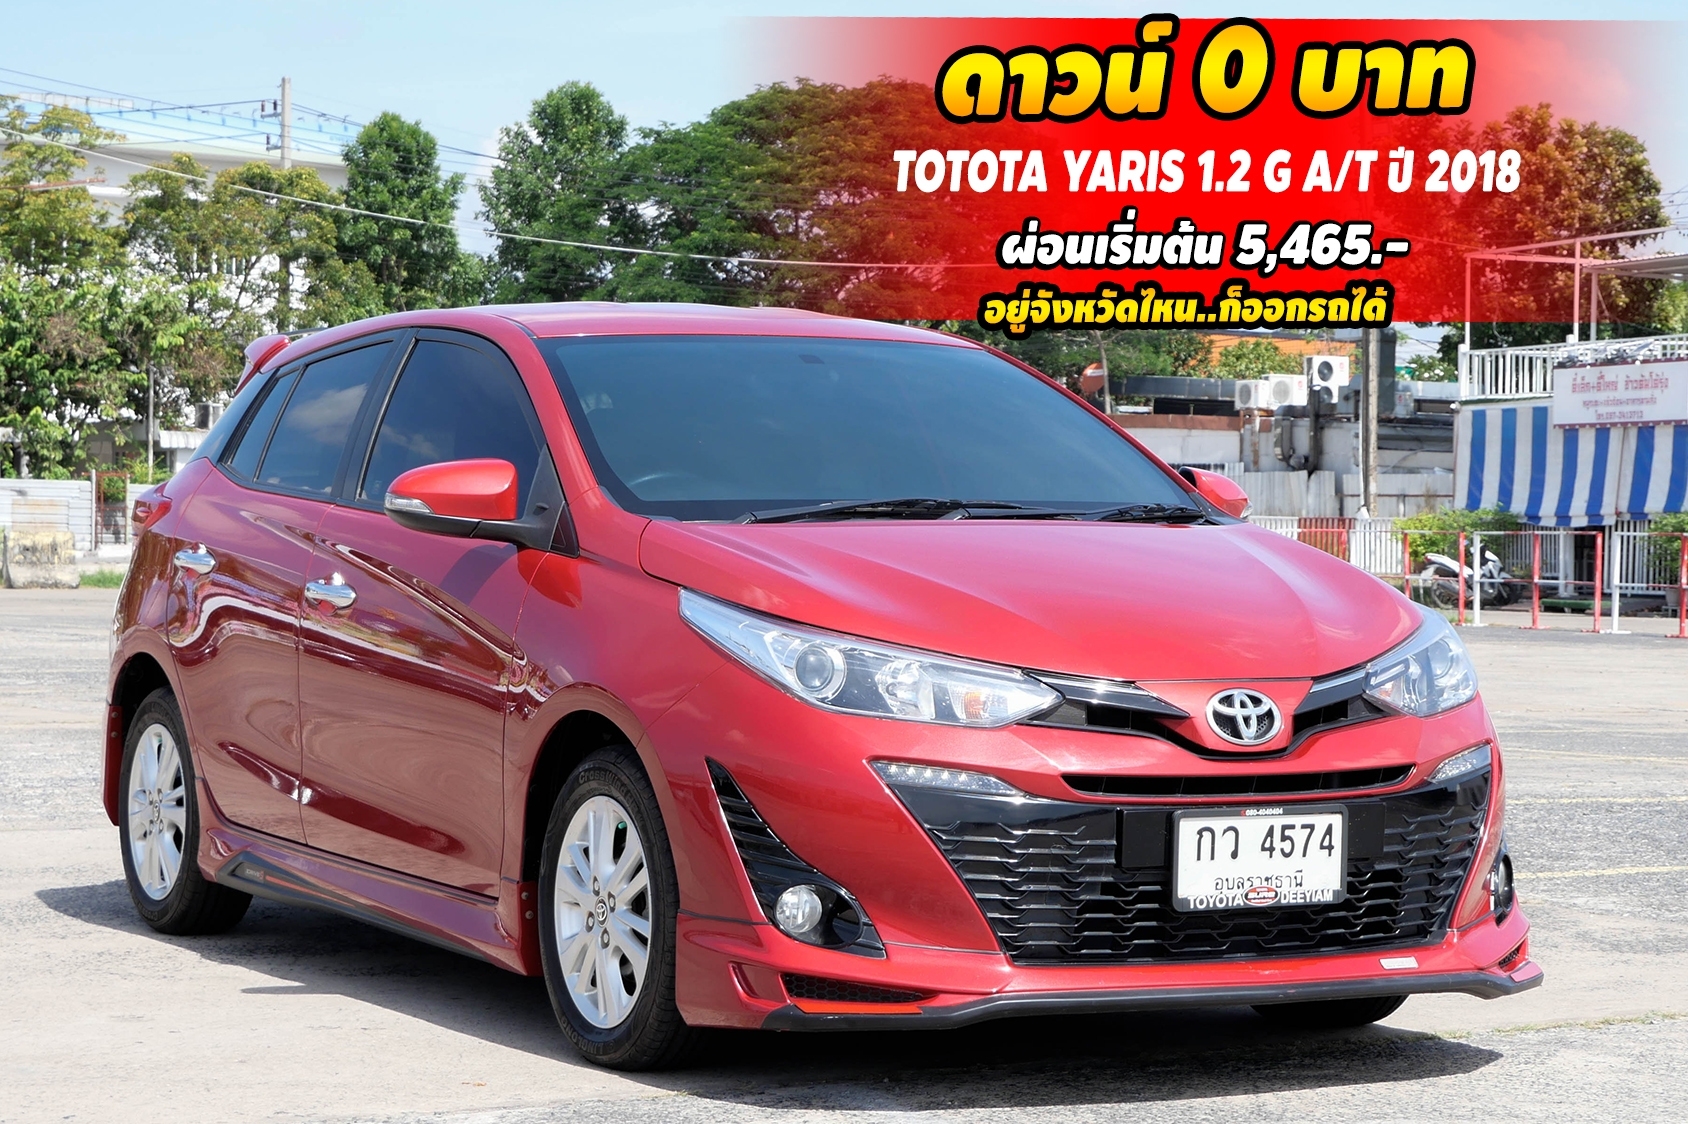 TOYOTA YARIS 1.2 G A/T ปี 2018